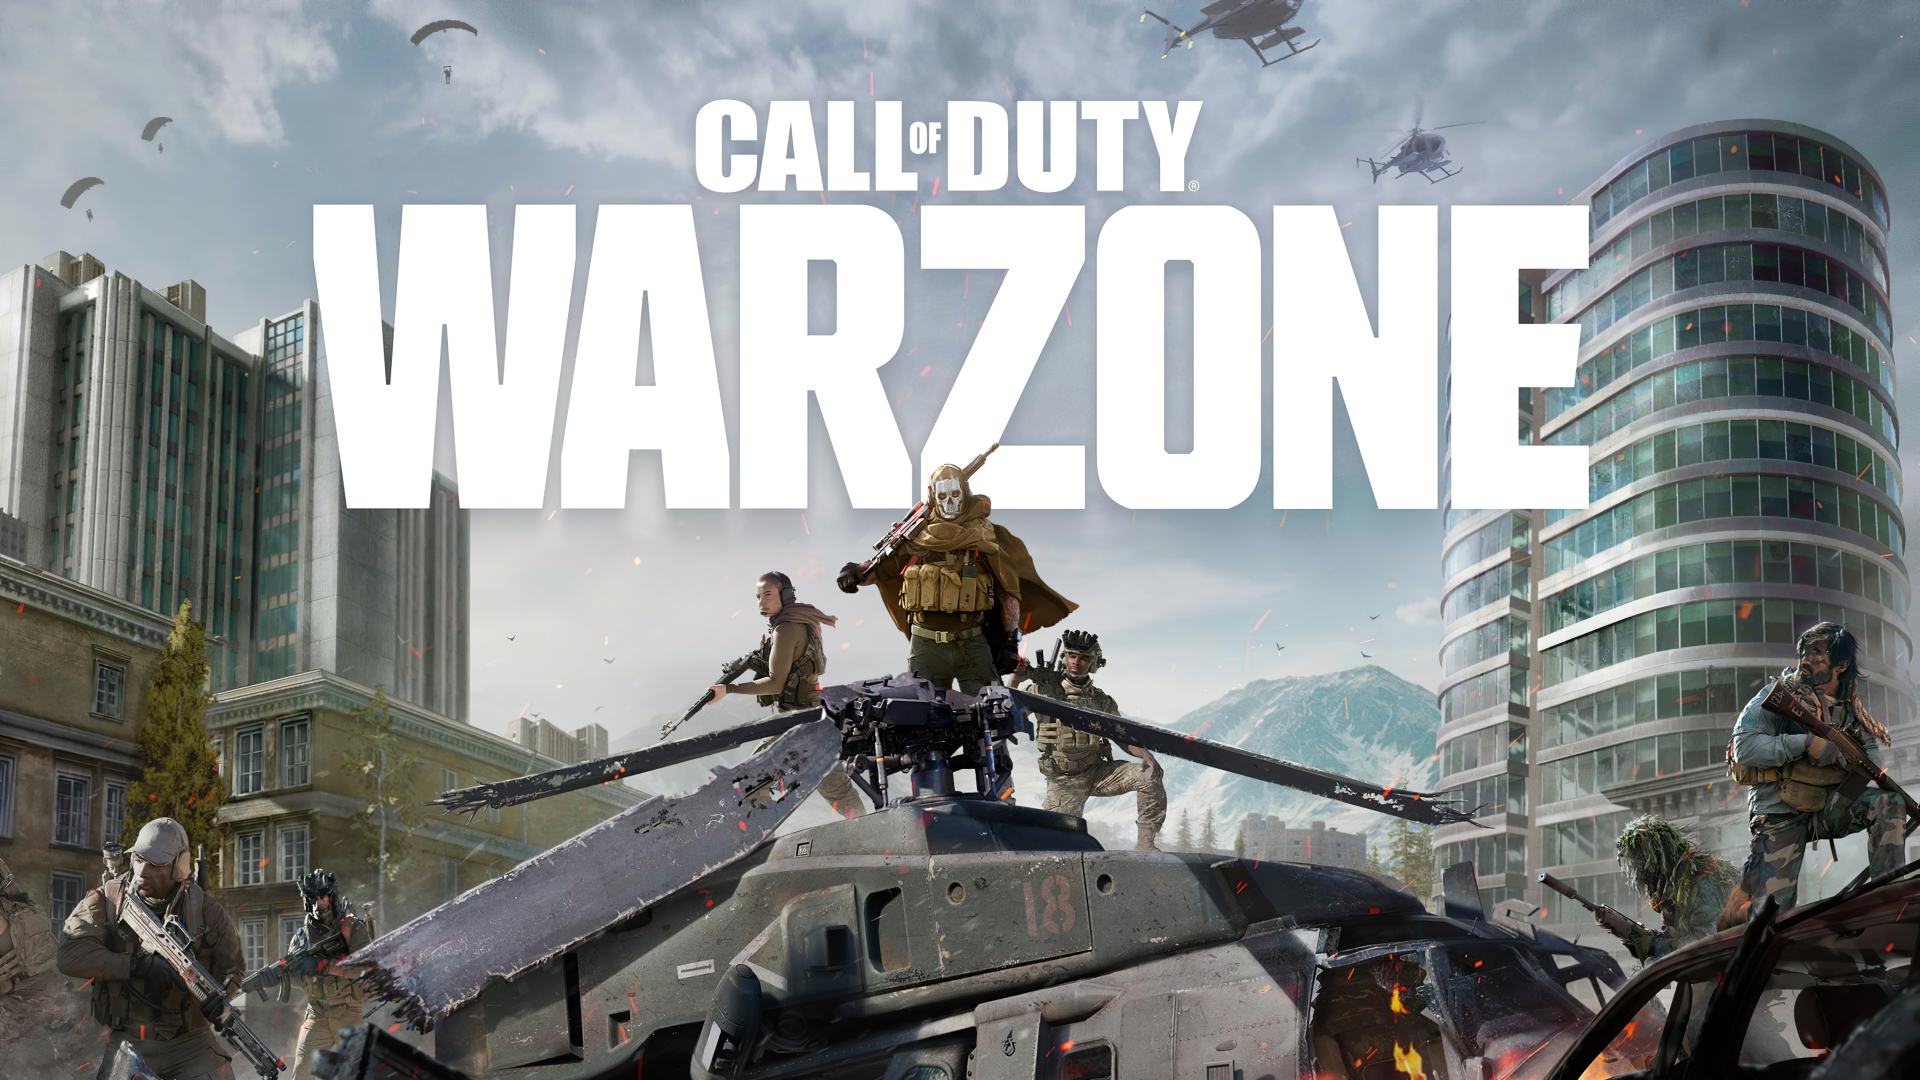 Call of Duty Warzone Wallpapers and Backgrounds